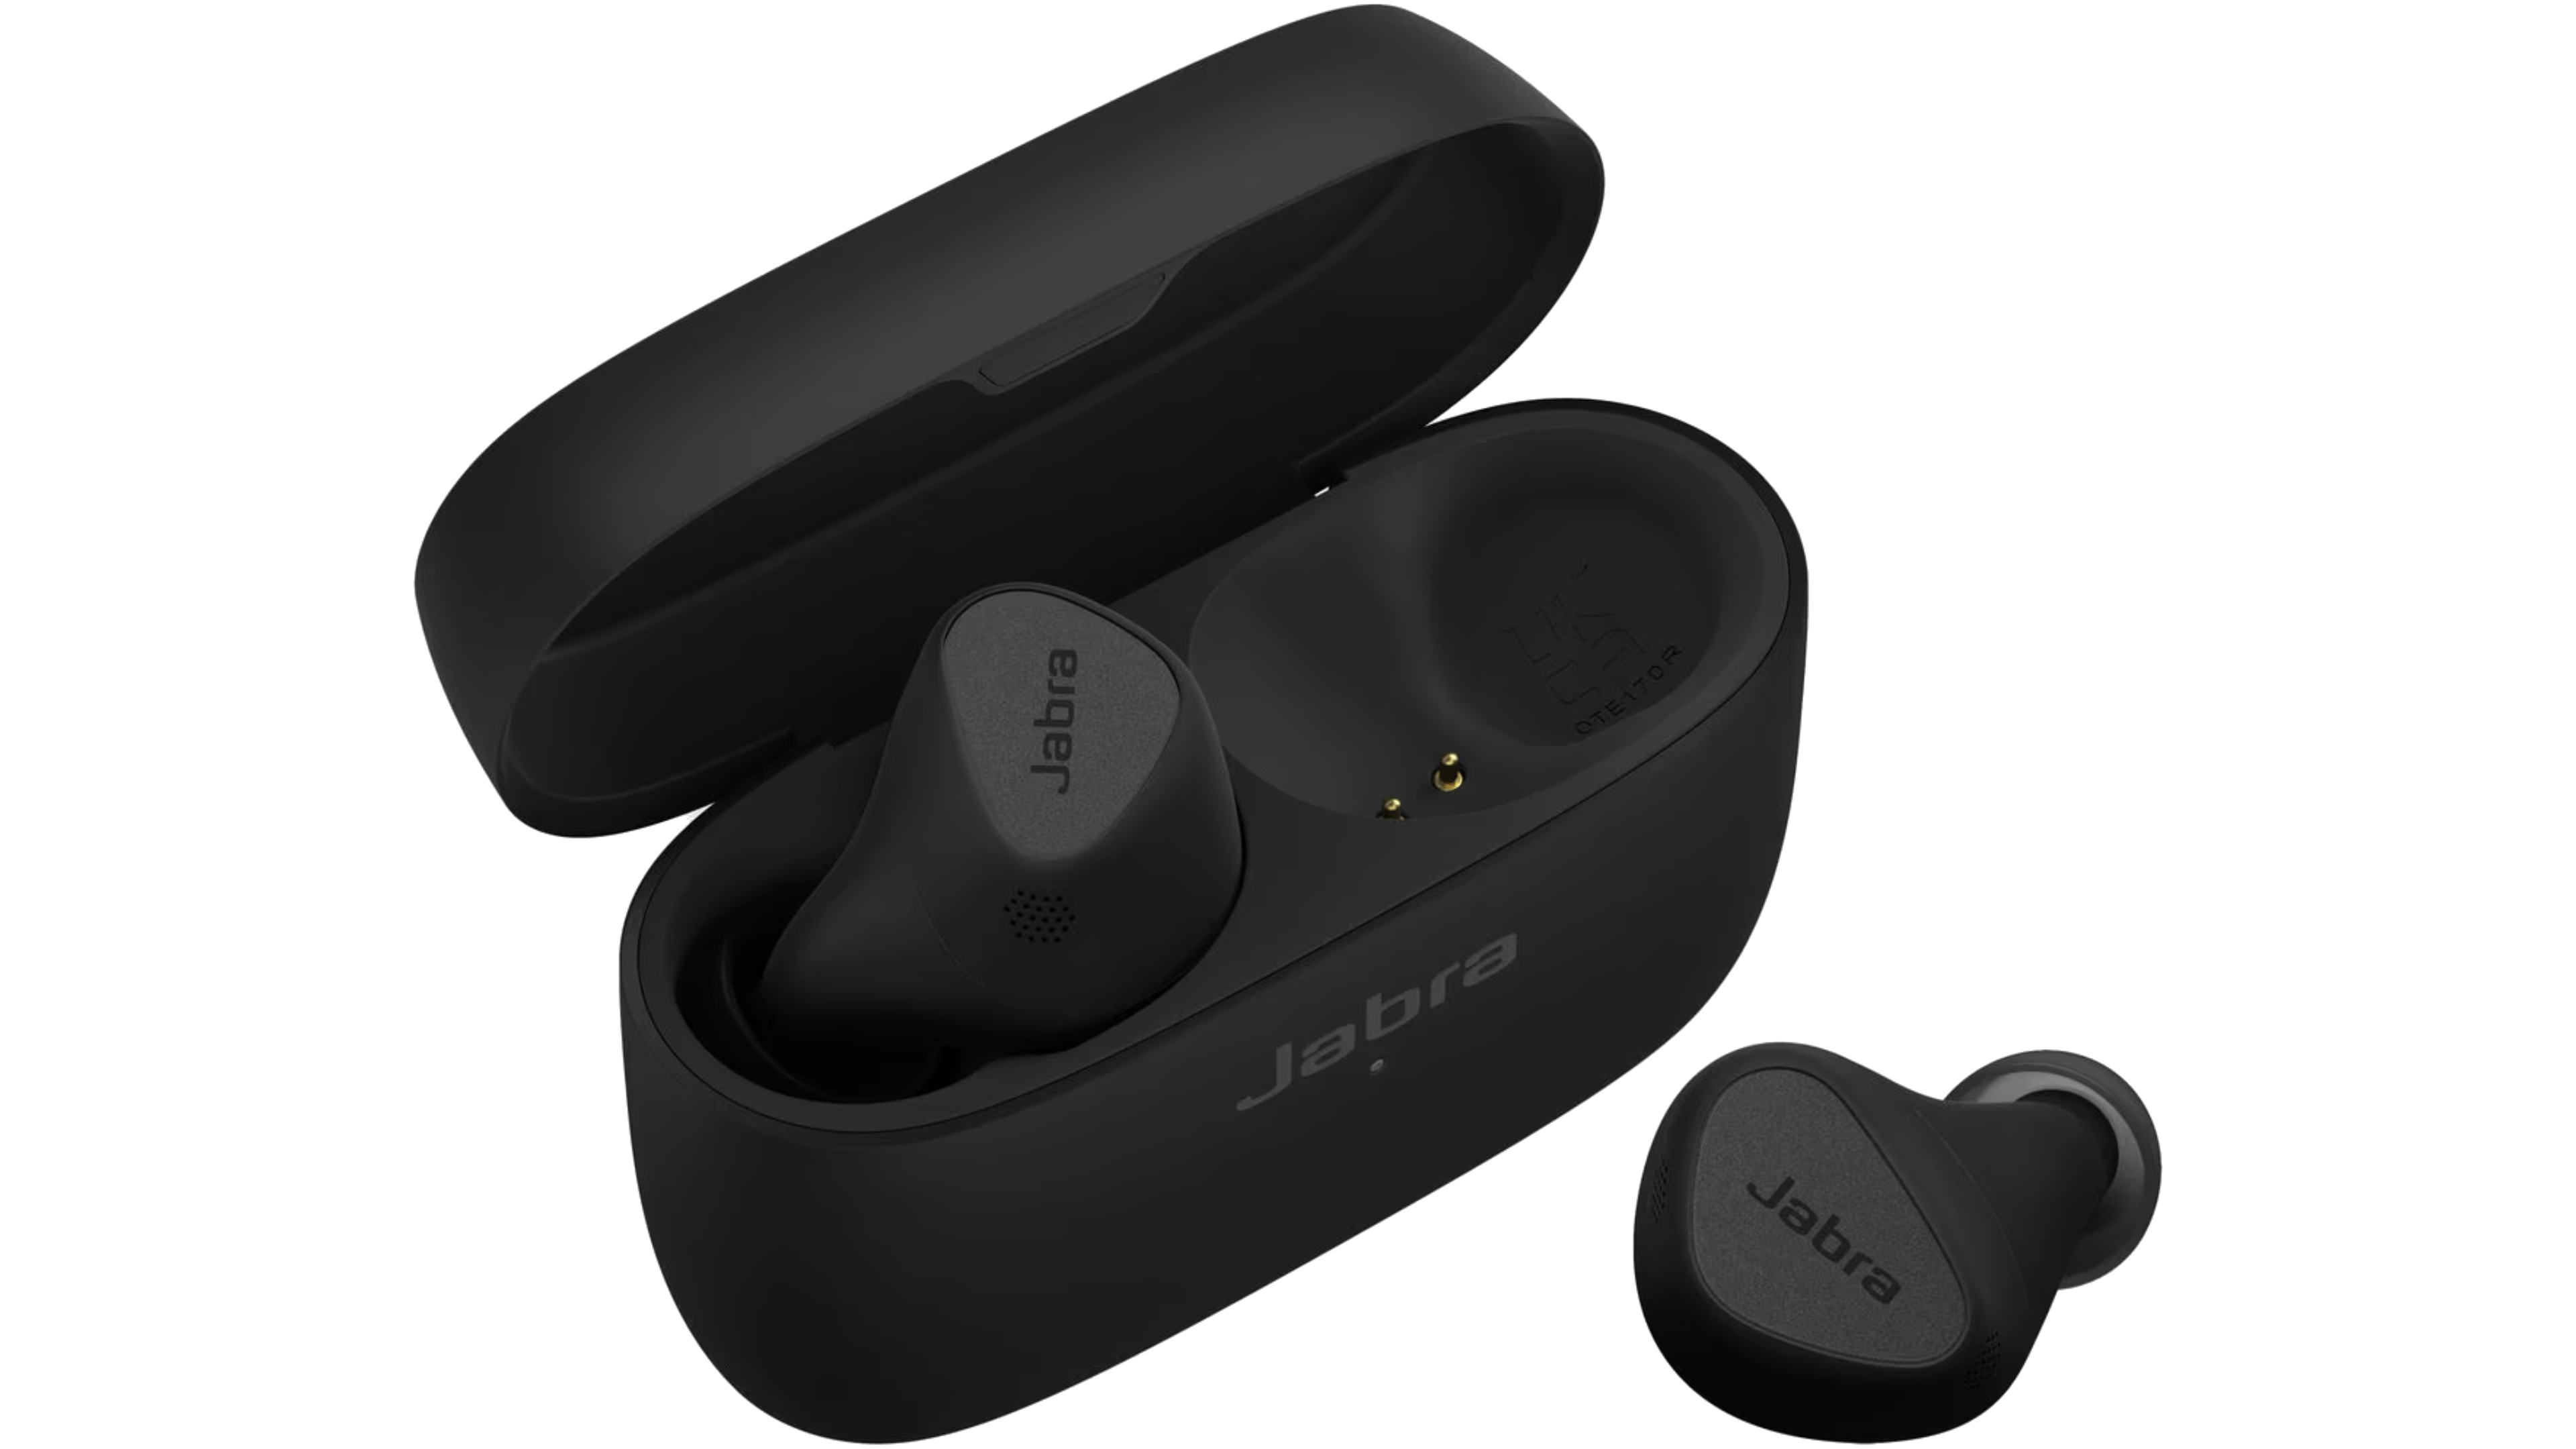 Jabra Elite 10 Review: Everything an Earbuds Needs to Have